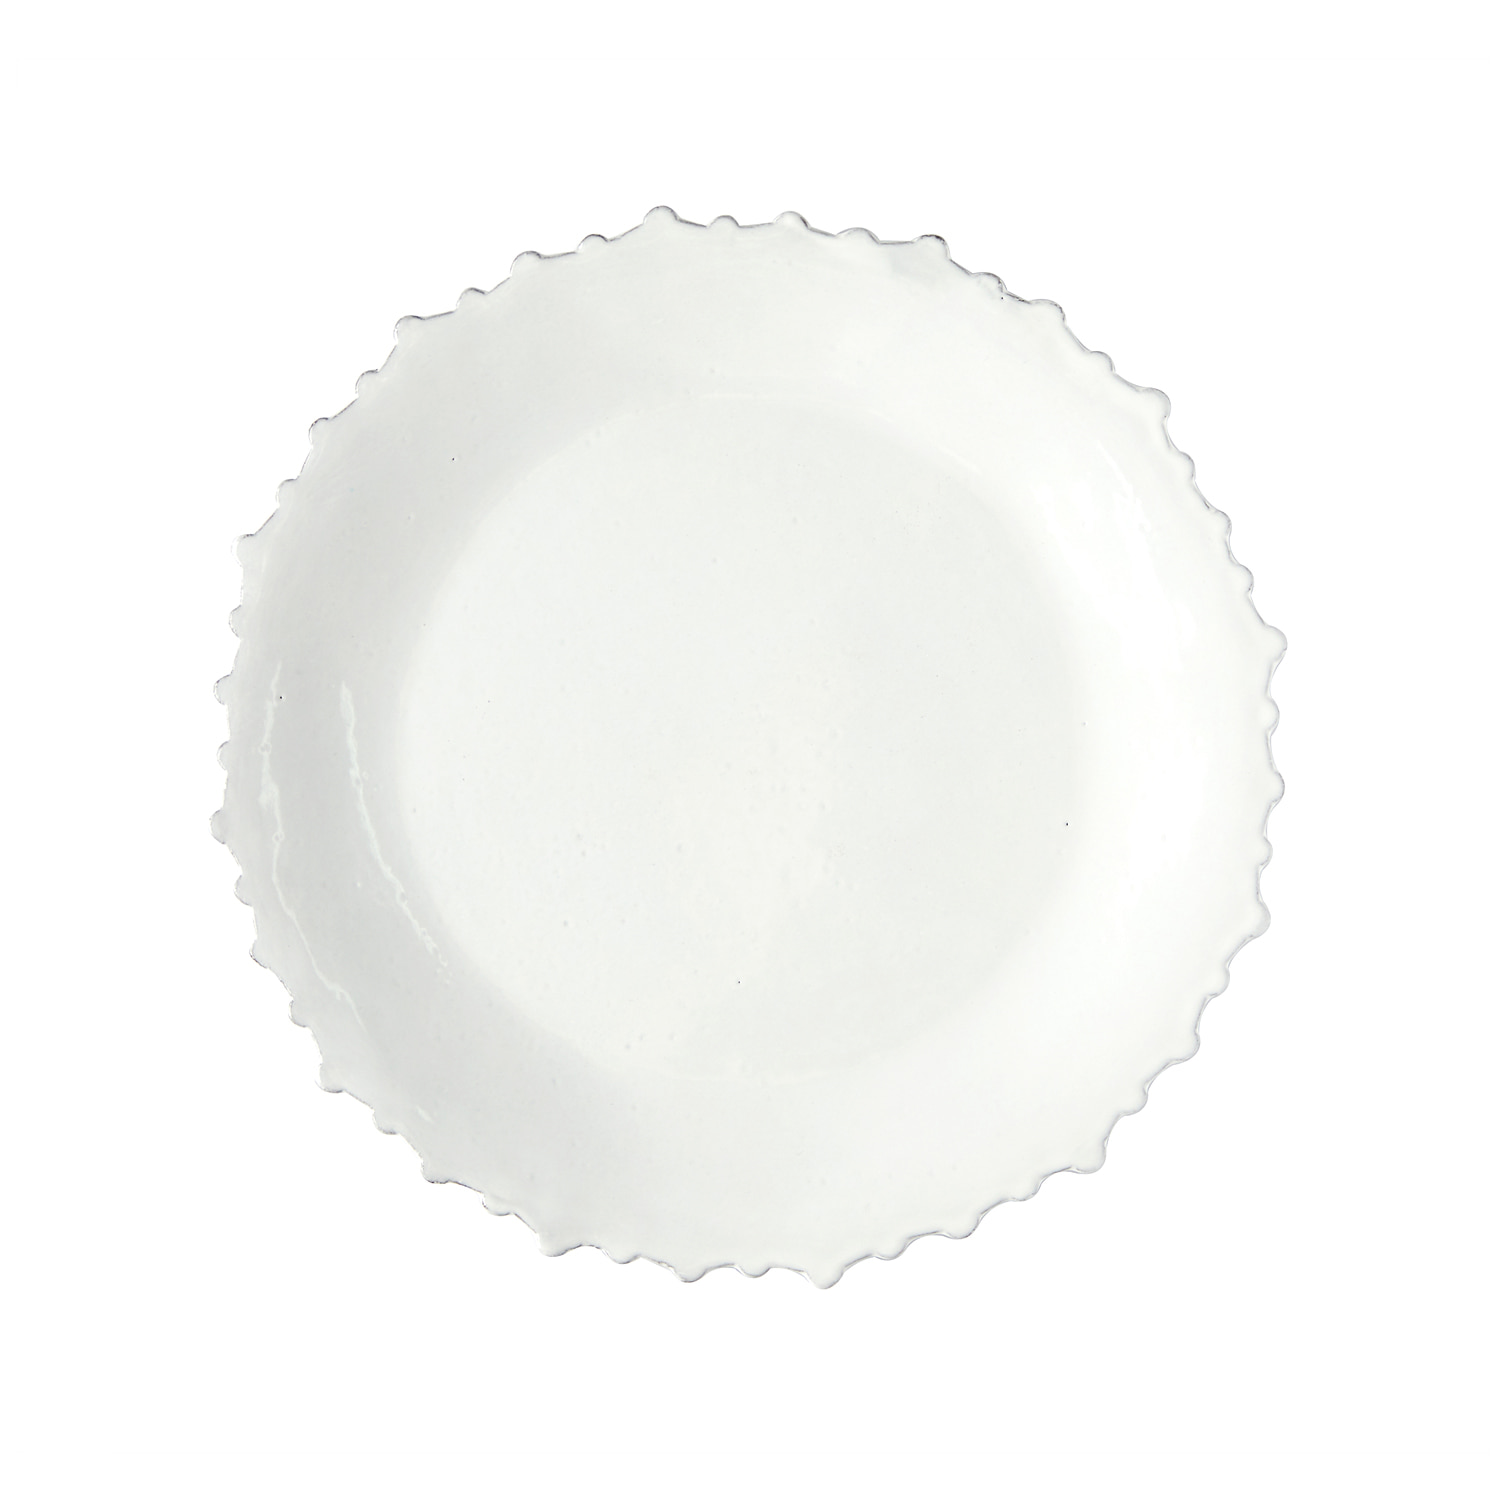 [Riviere] Large Dinner Plate